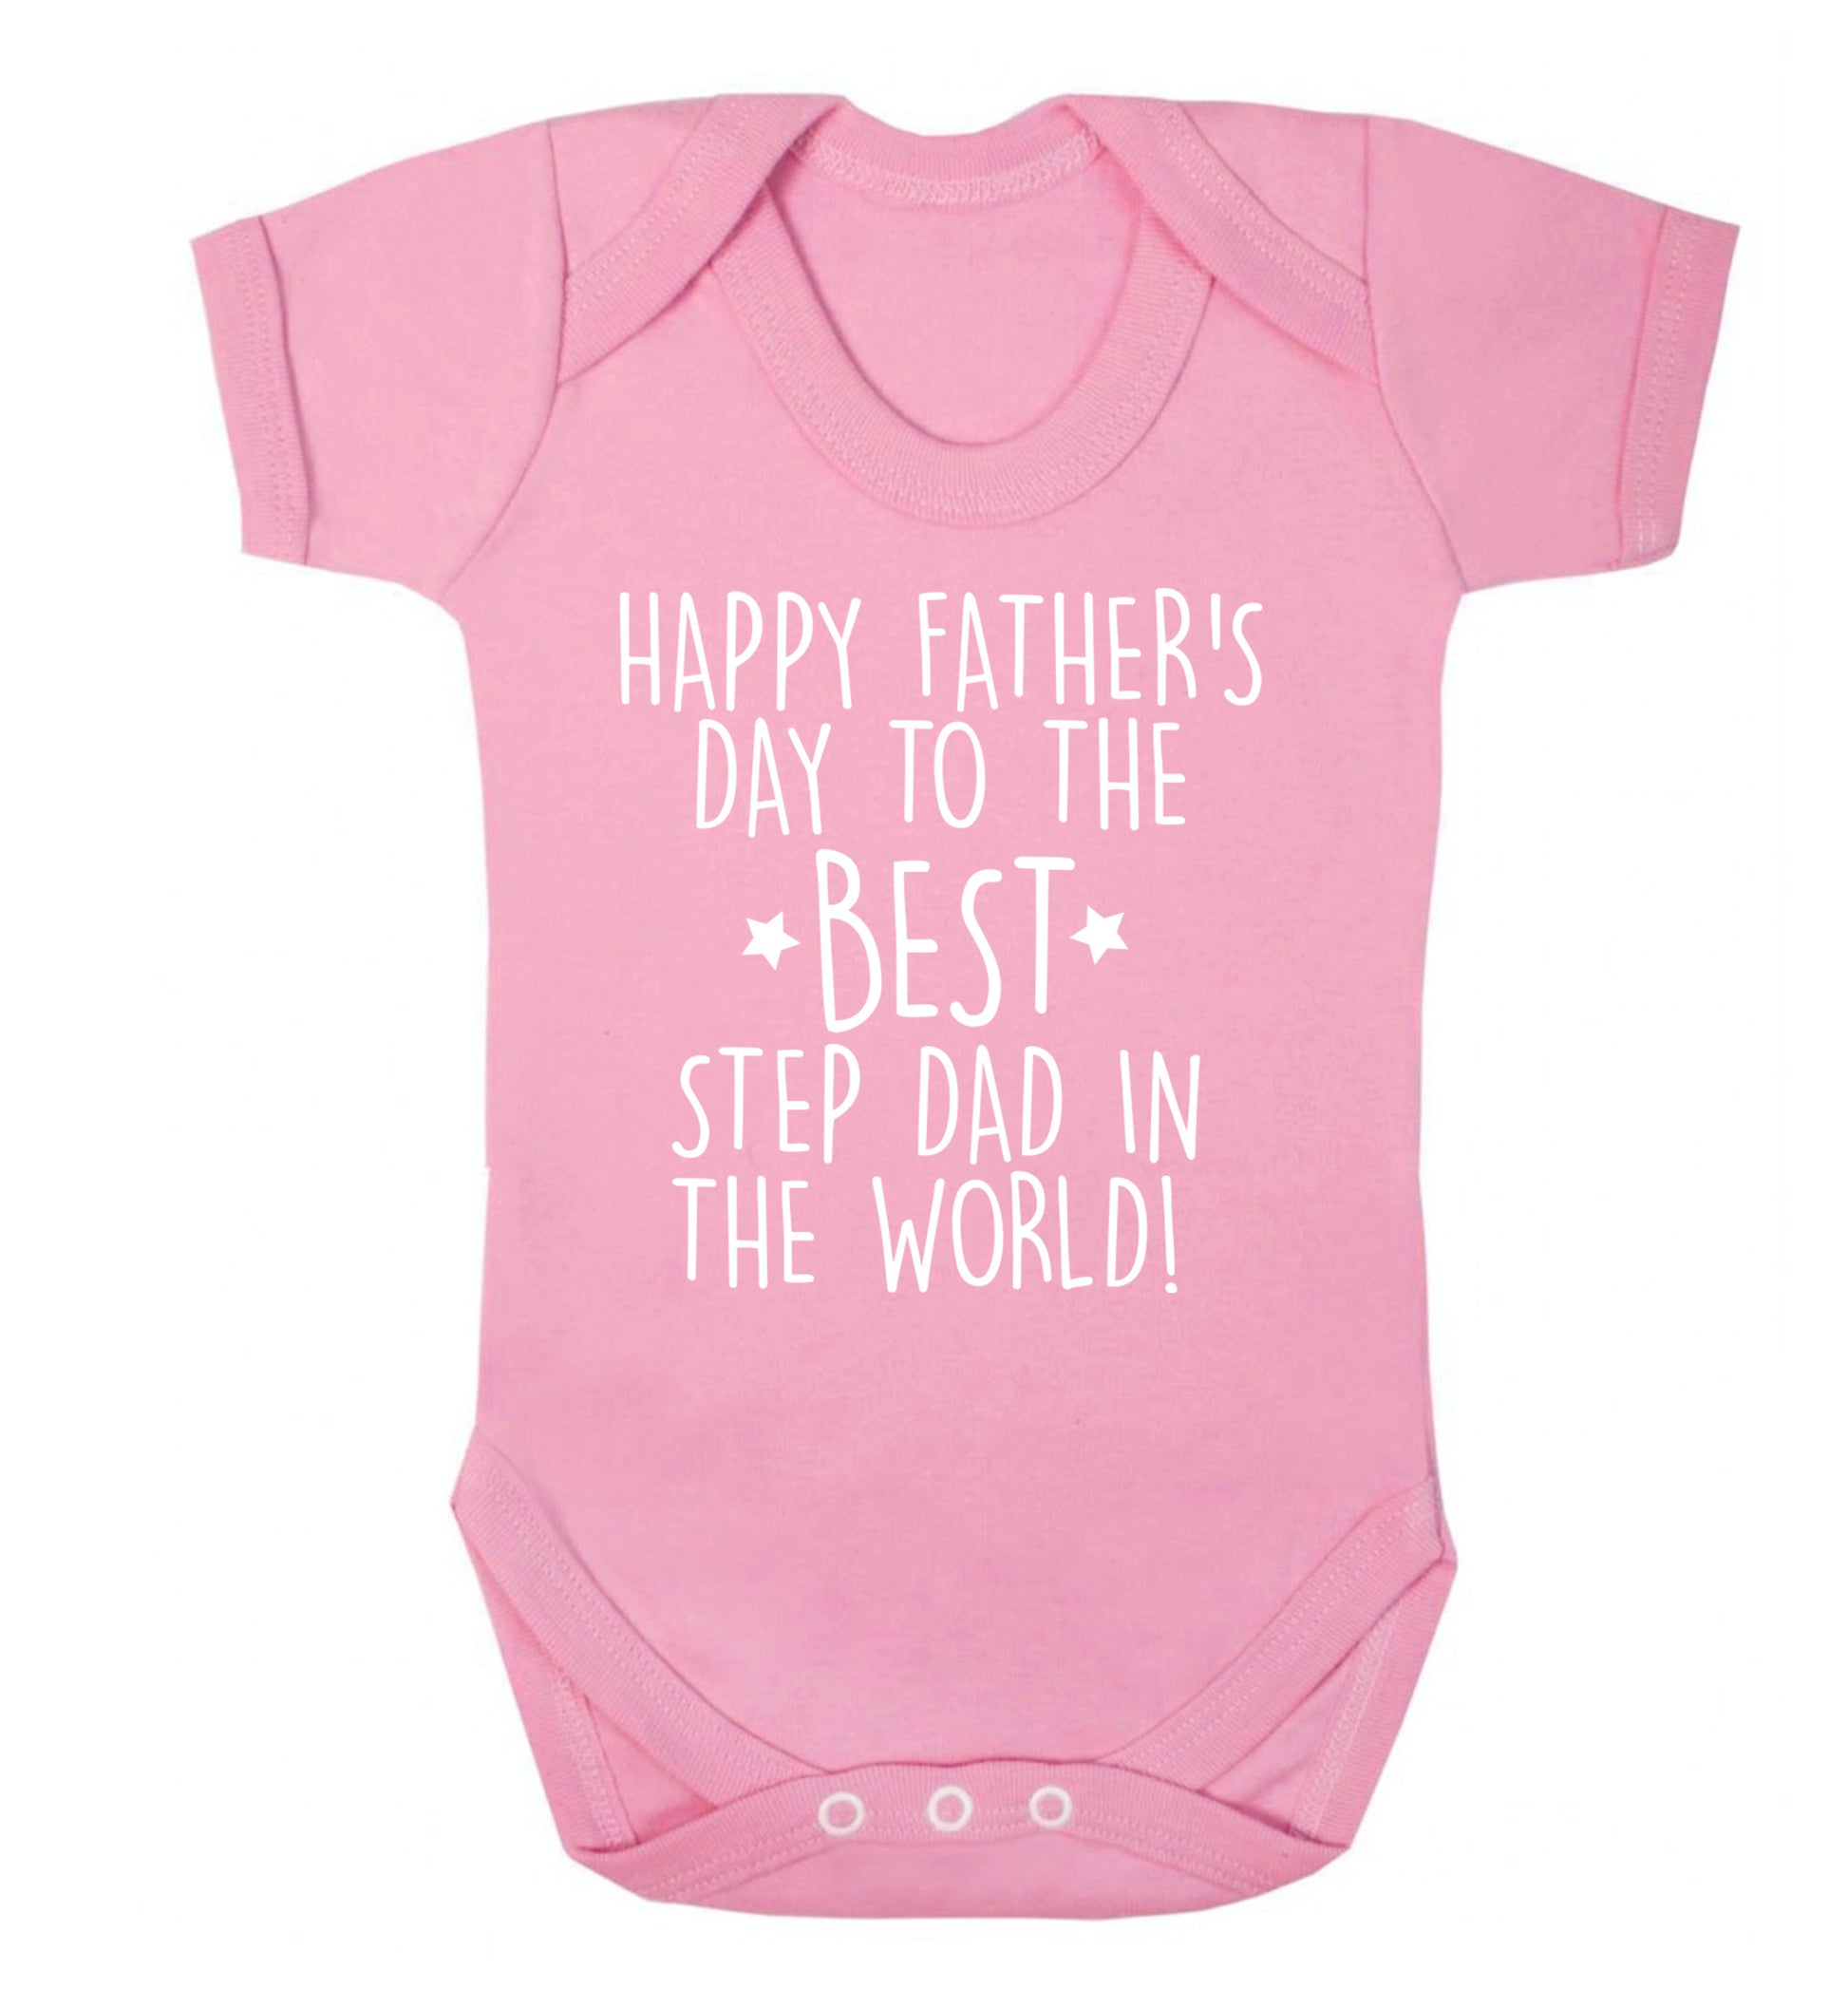 Happy Father's day to the best step dad in the world! Baby Vest pale pink 18-24 months